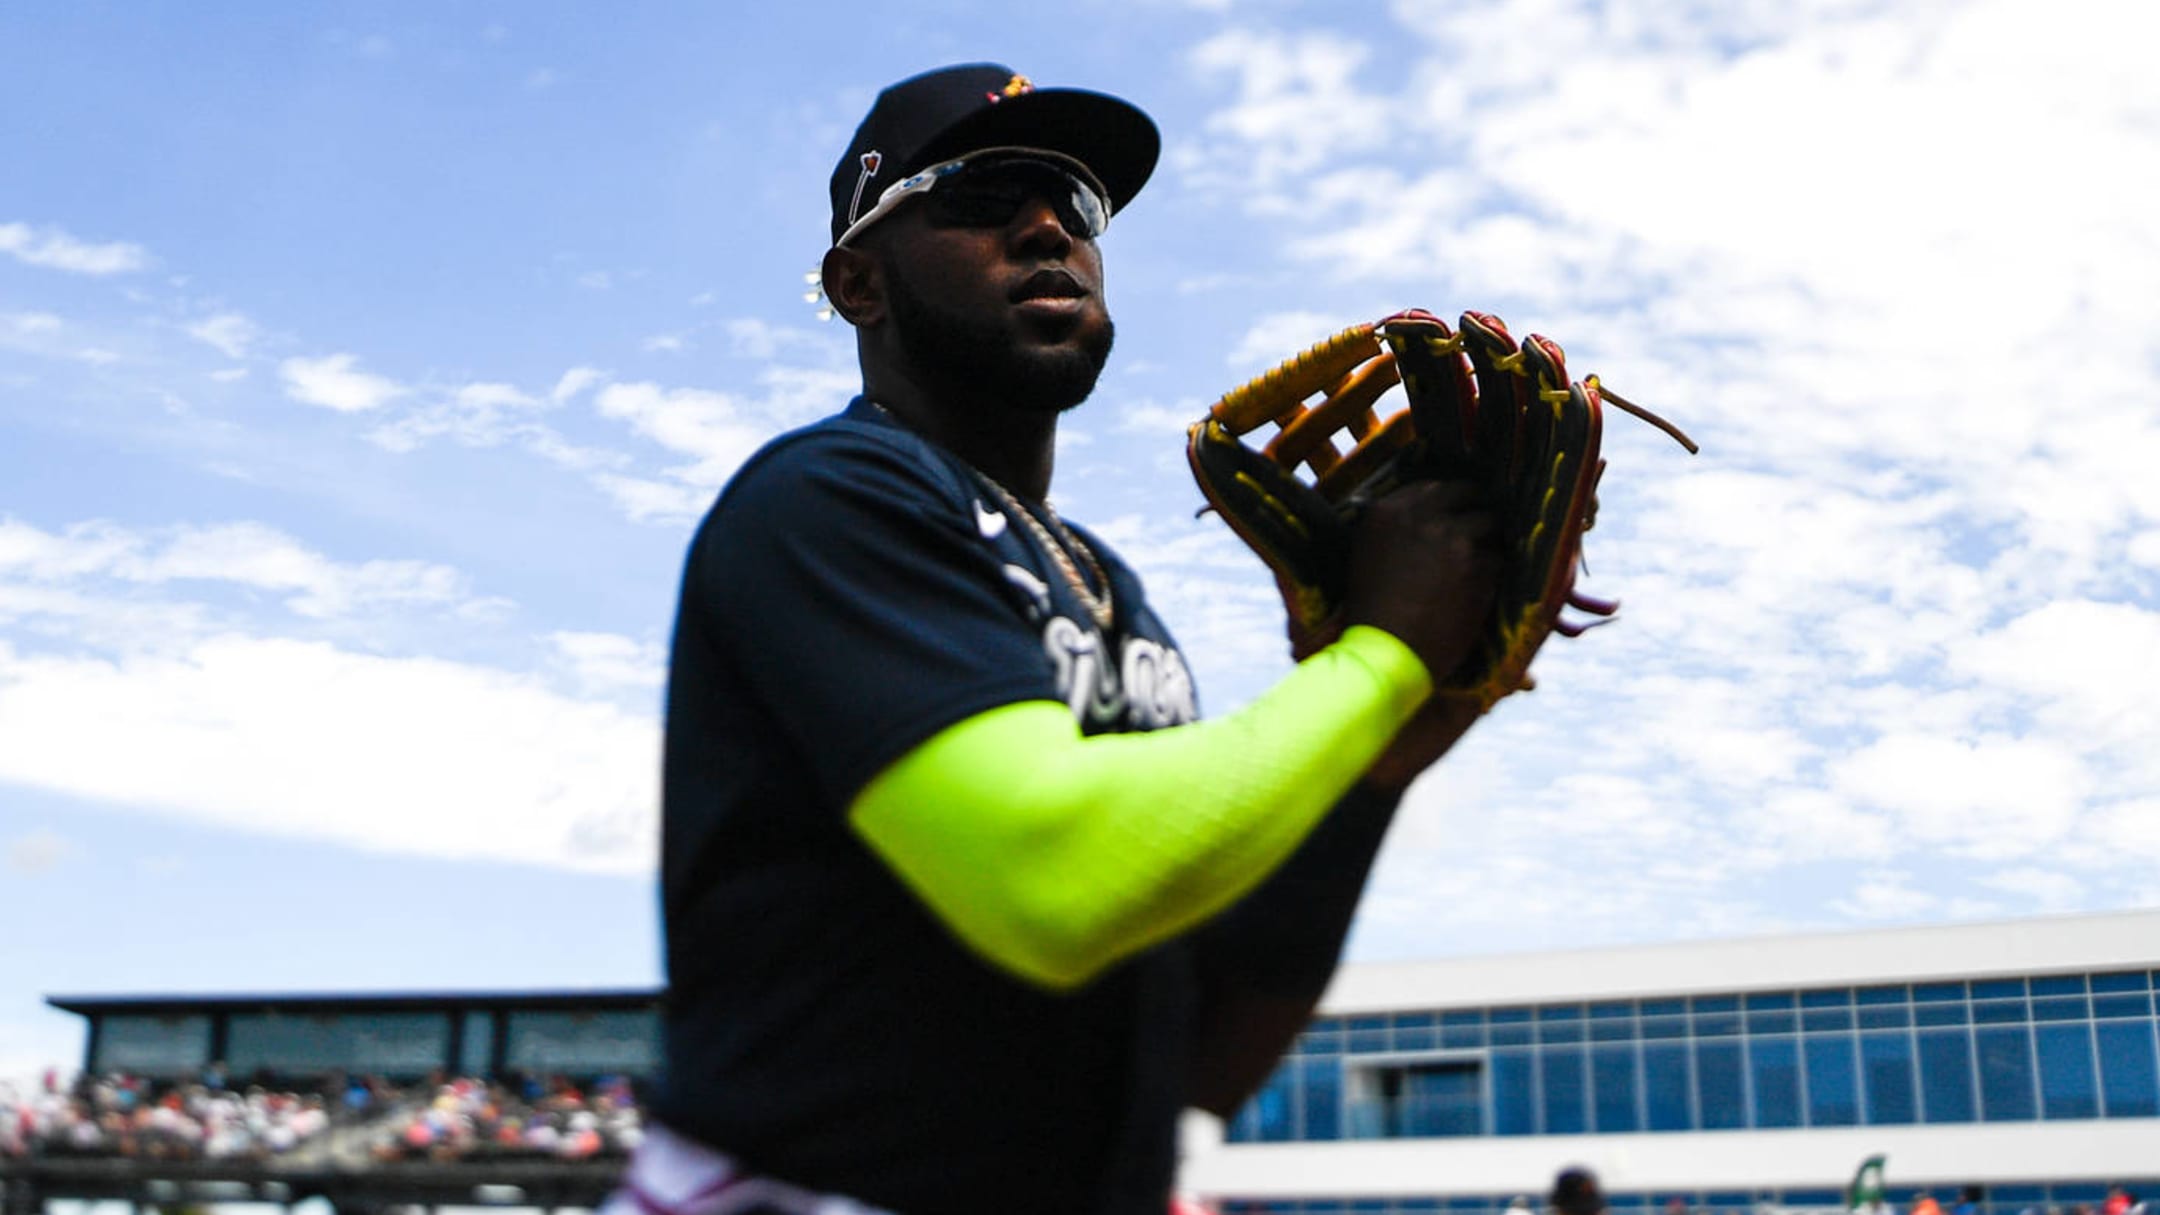 Braves: Marcell Ozuna diagnosed with facial injury after domestic abuse 